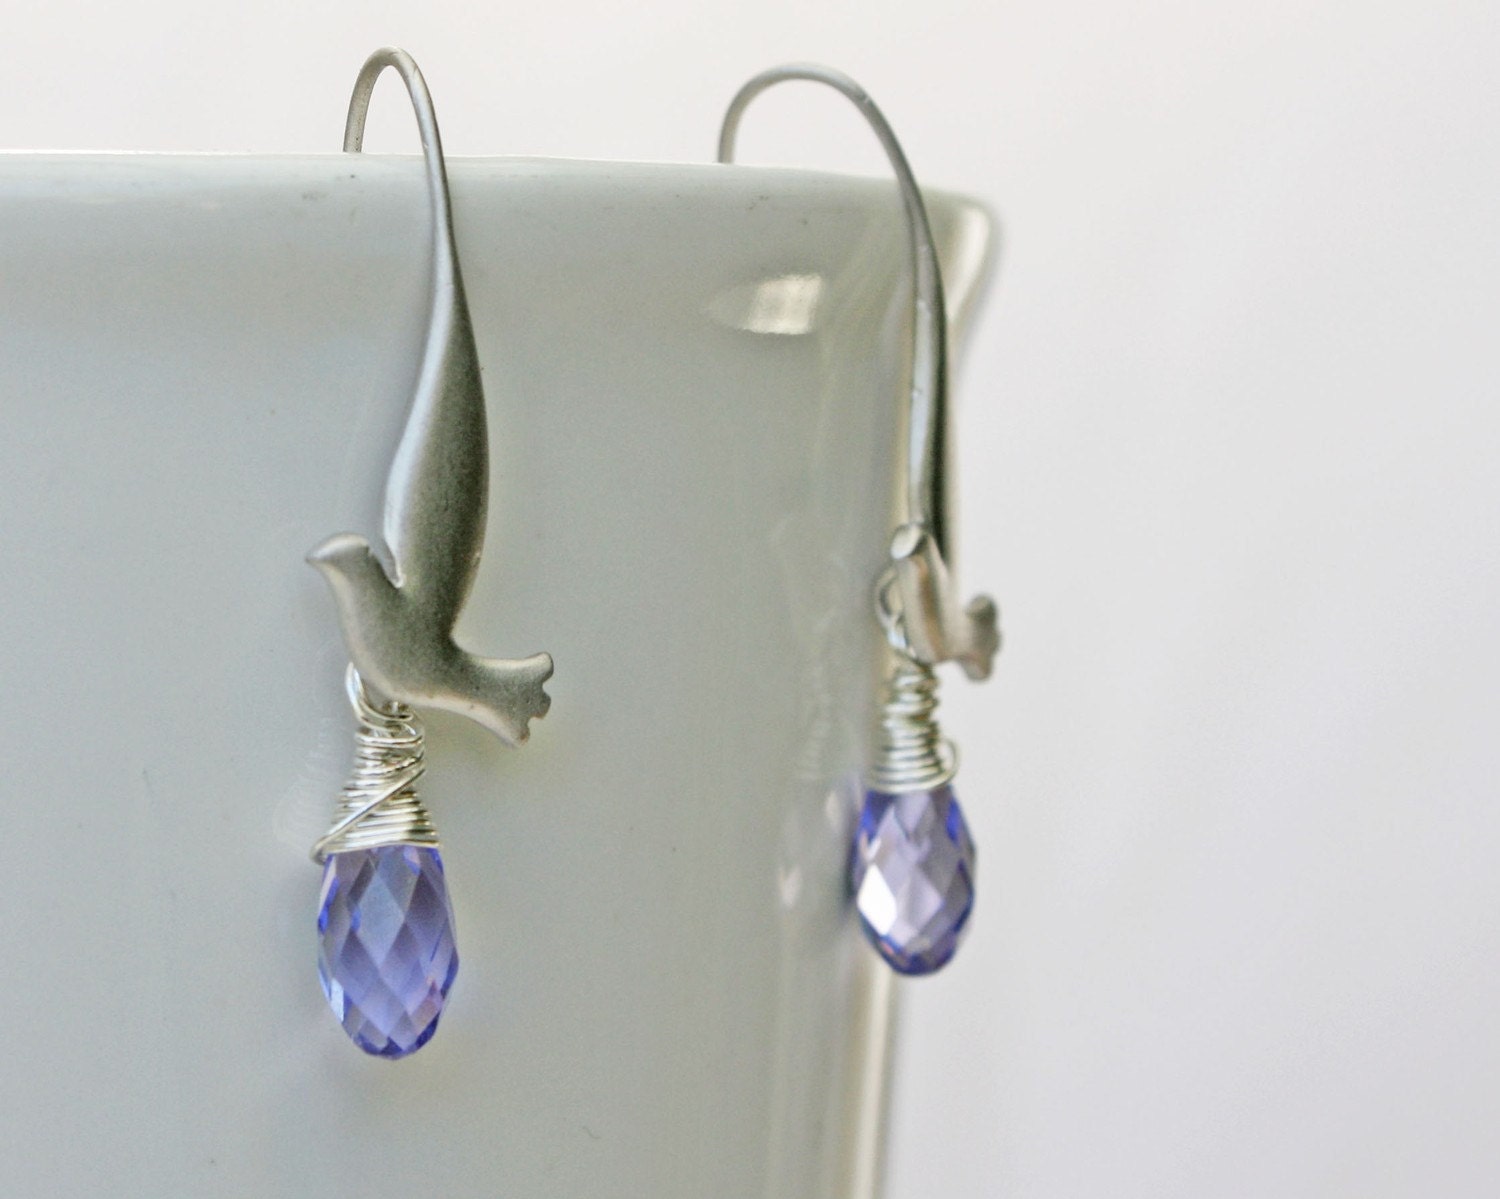 SALE Bird earrings with dove and lilac swarovski crystal briolette in silver. MOTHERS DAY